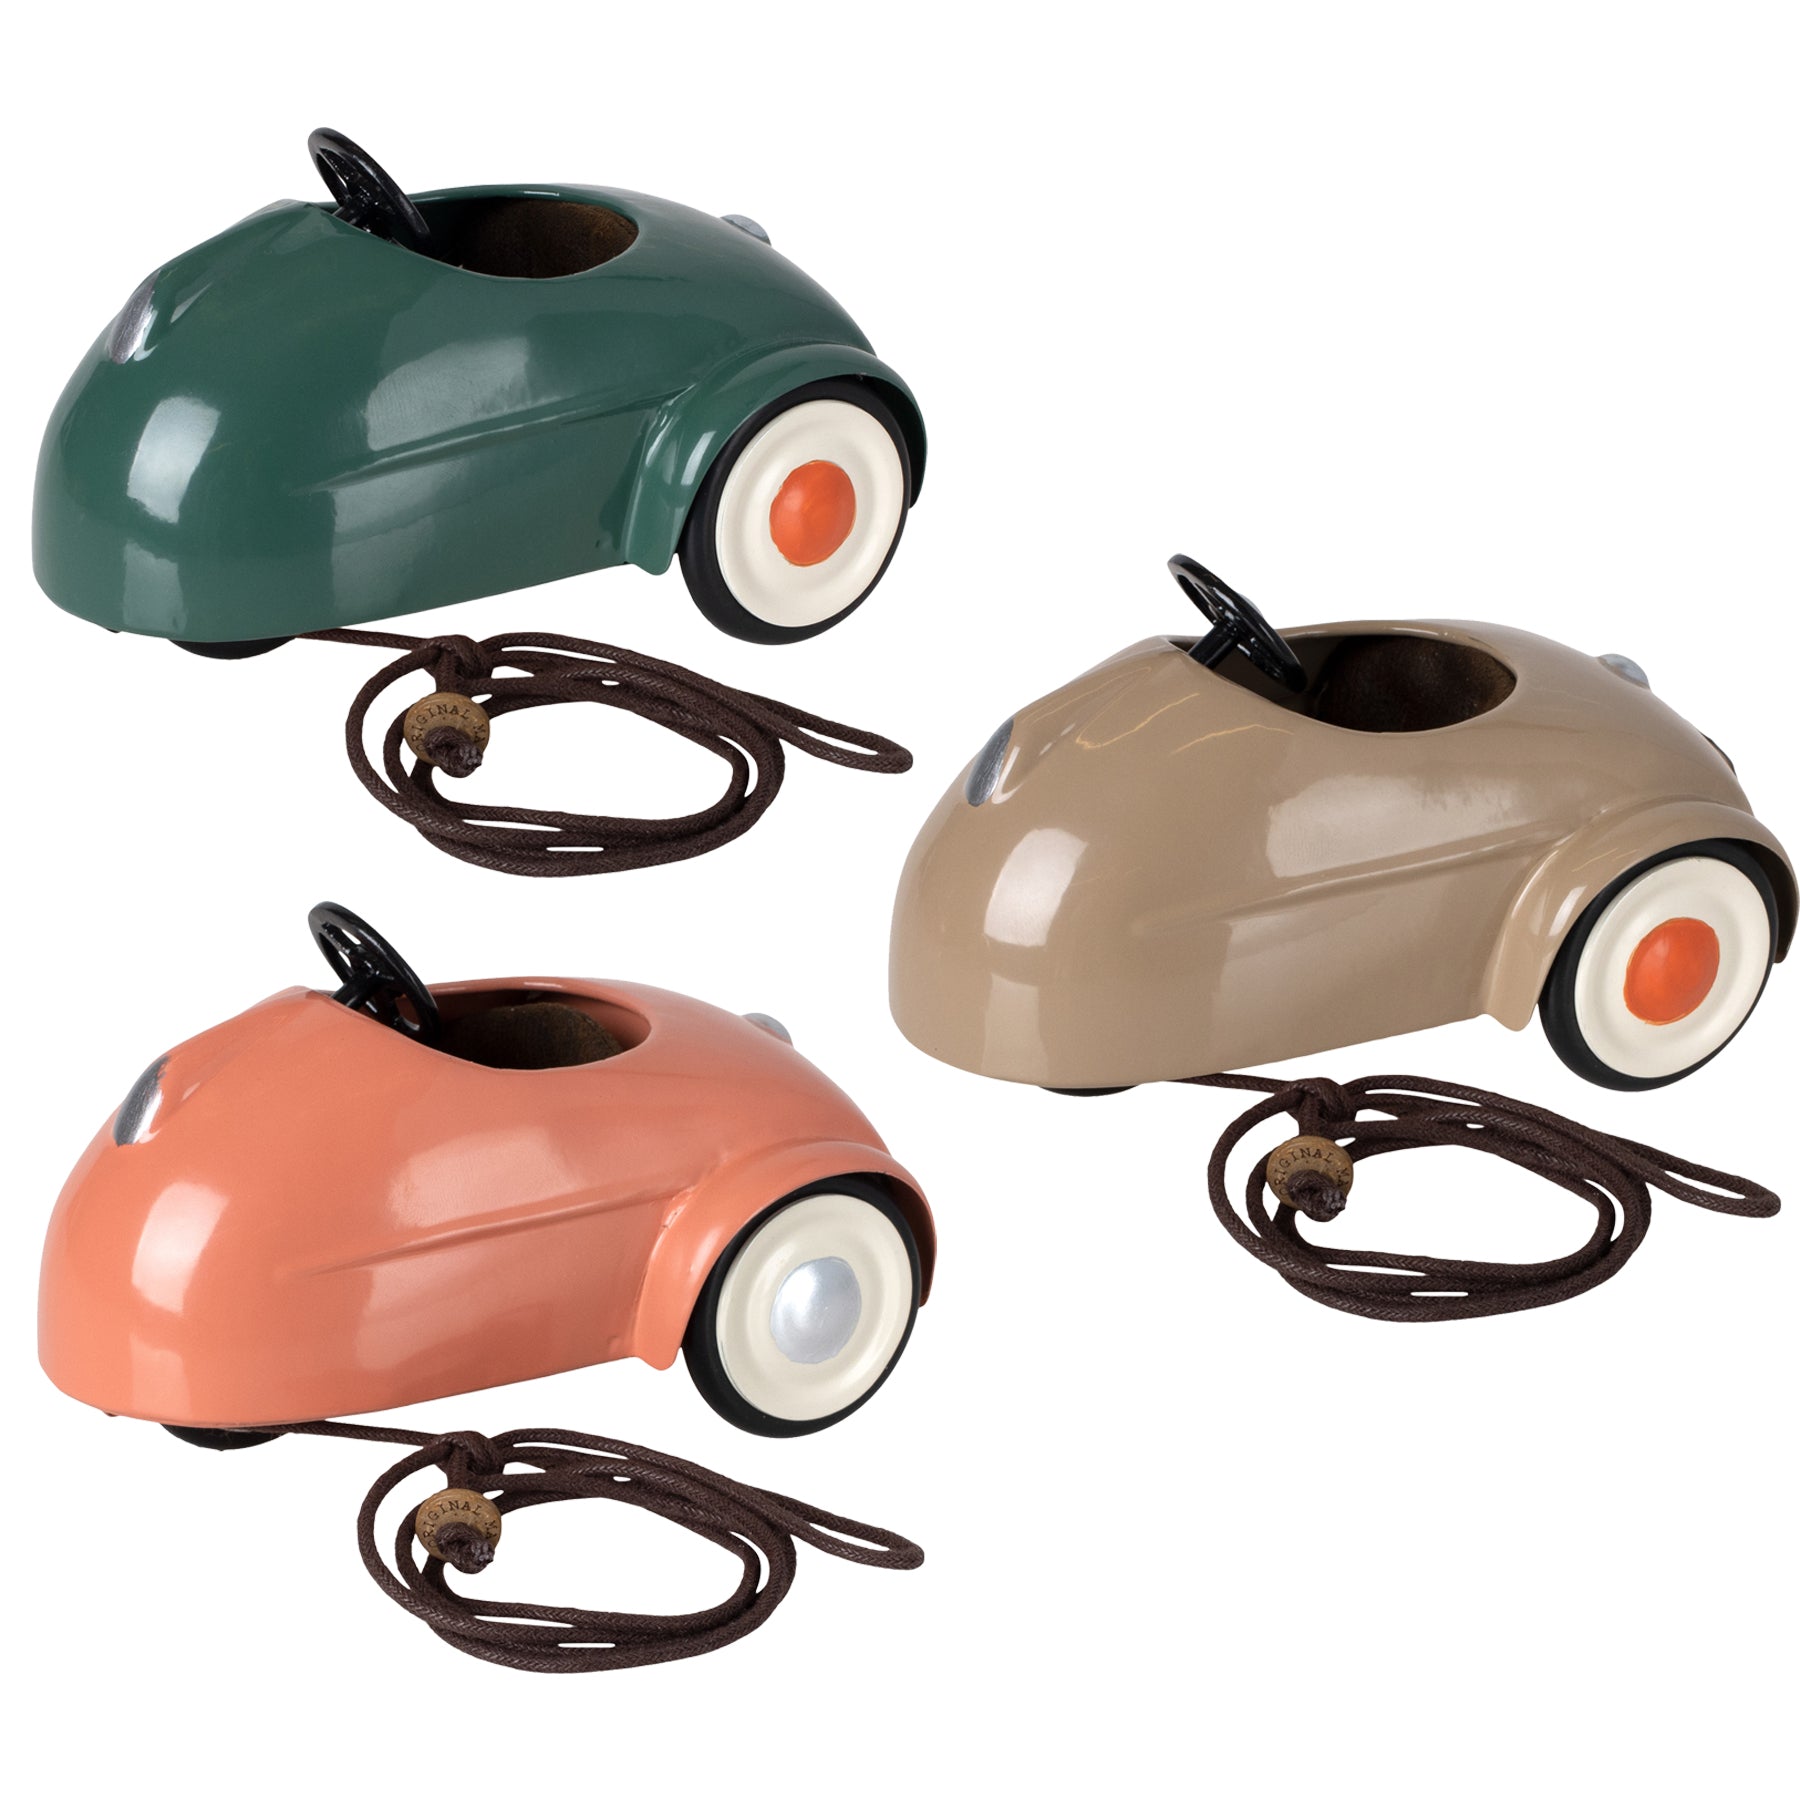 Maileg Mouse Car - Coral, Dark Green or Light Brown